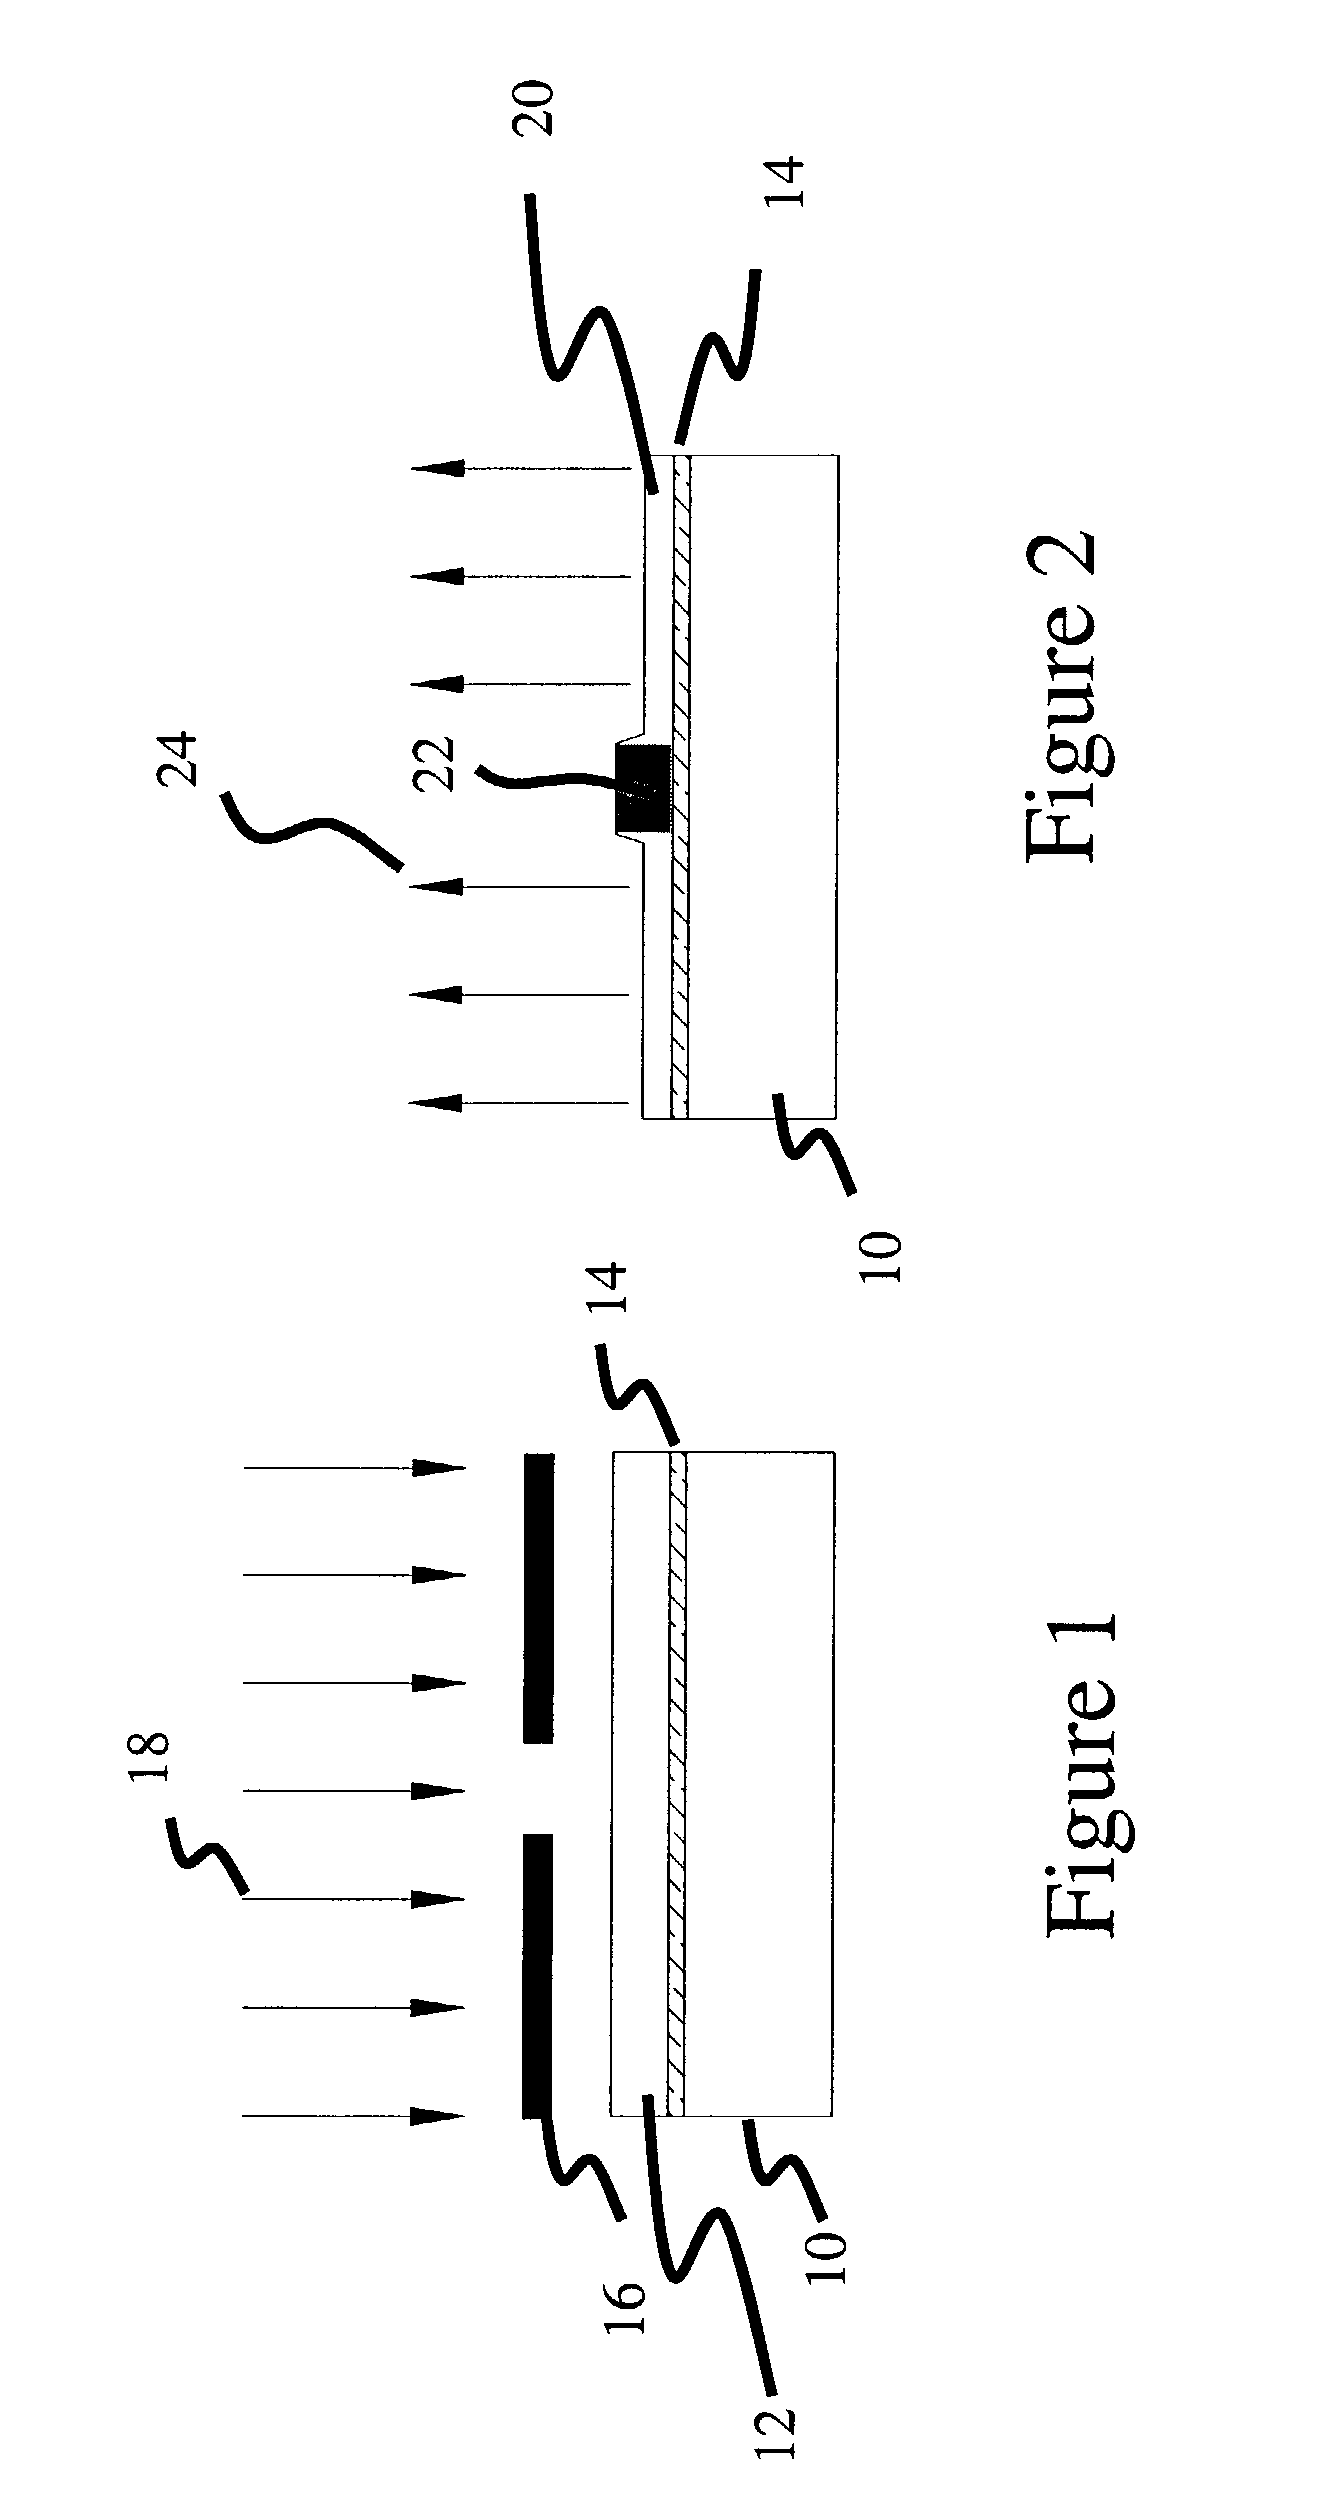 Method for making optical device structures